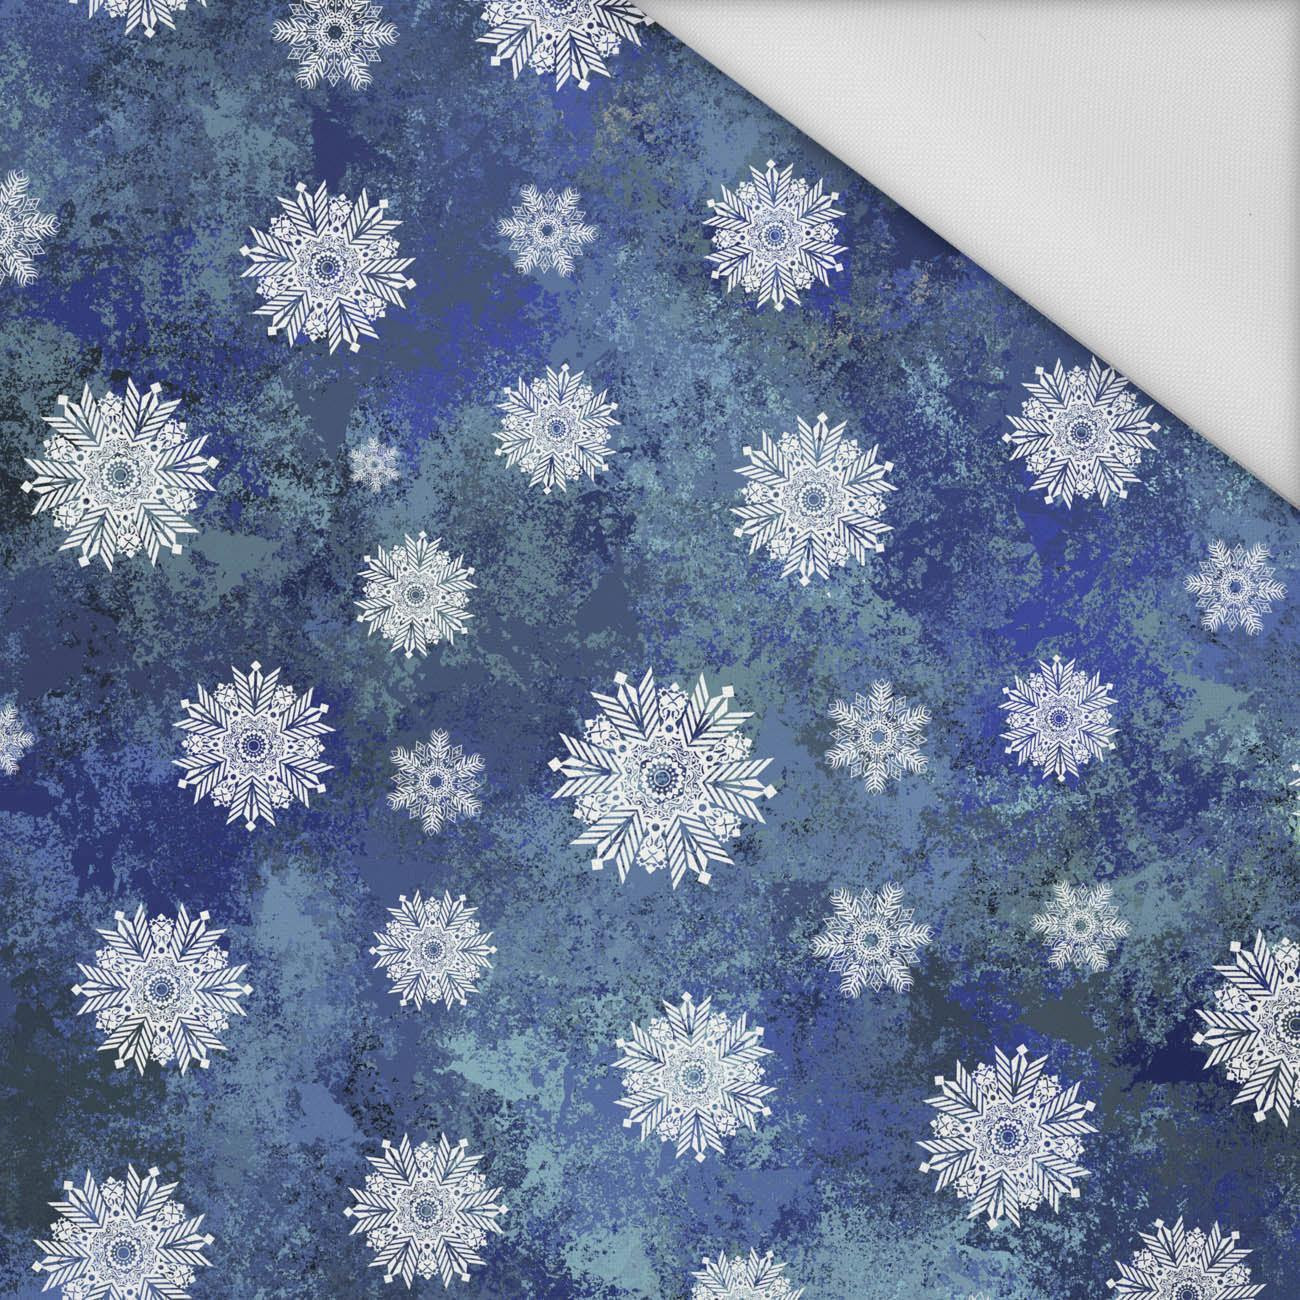 SNOWFLAKES PAT. 2 (WINTER IS COMING) - Waterproof woven fabric